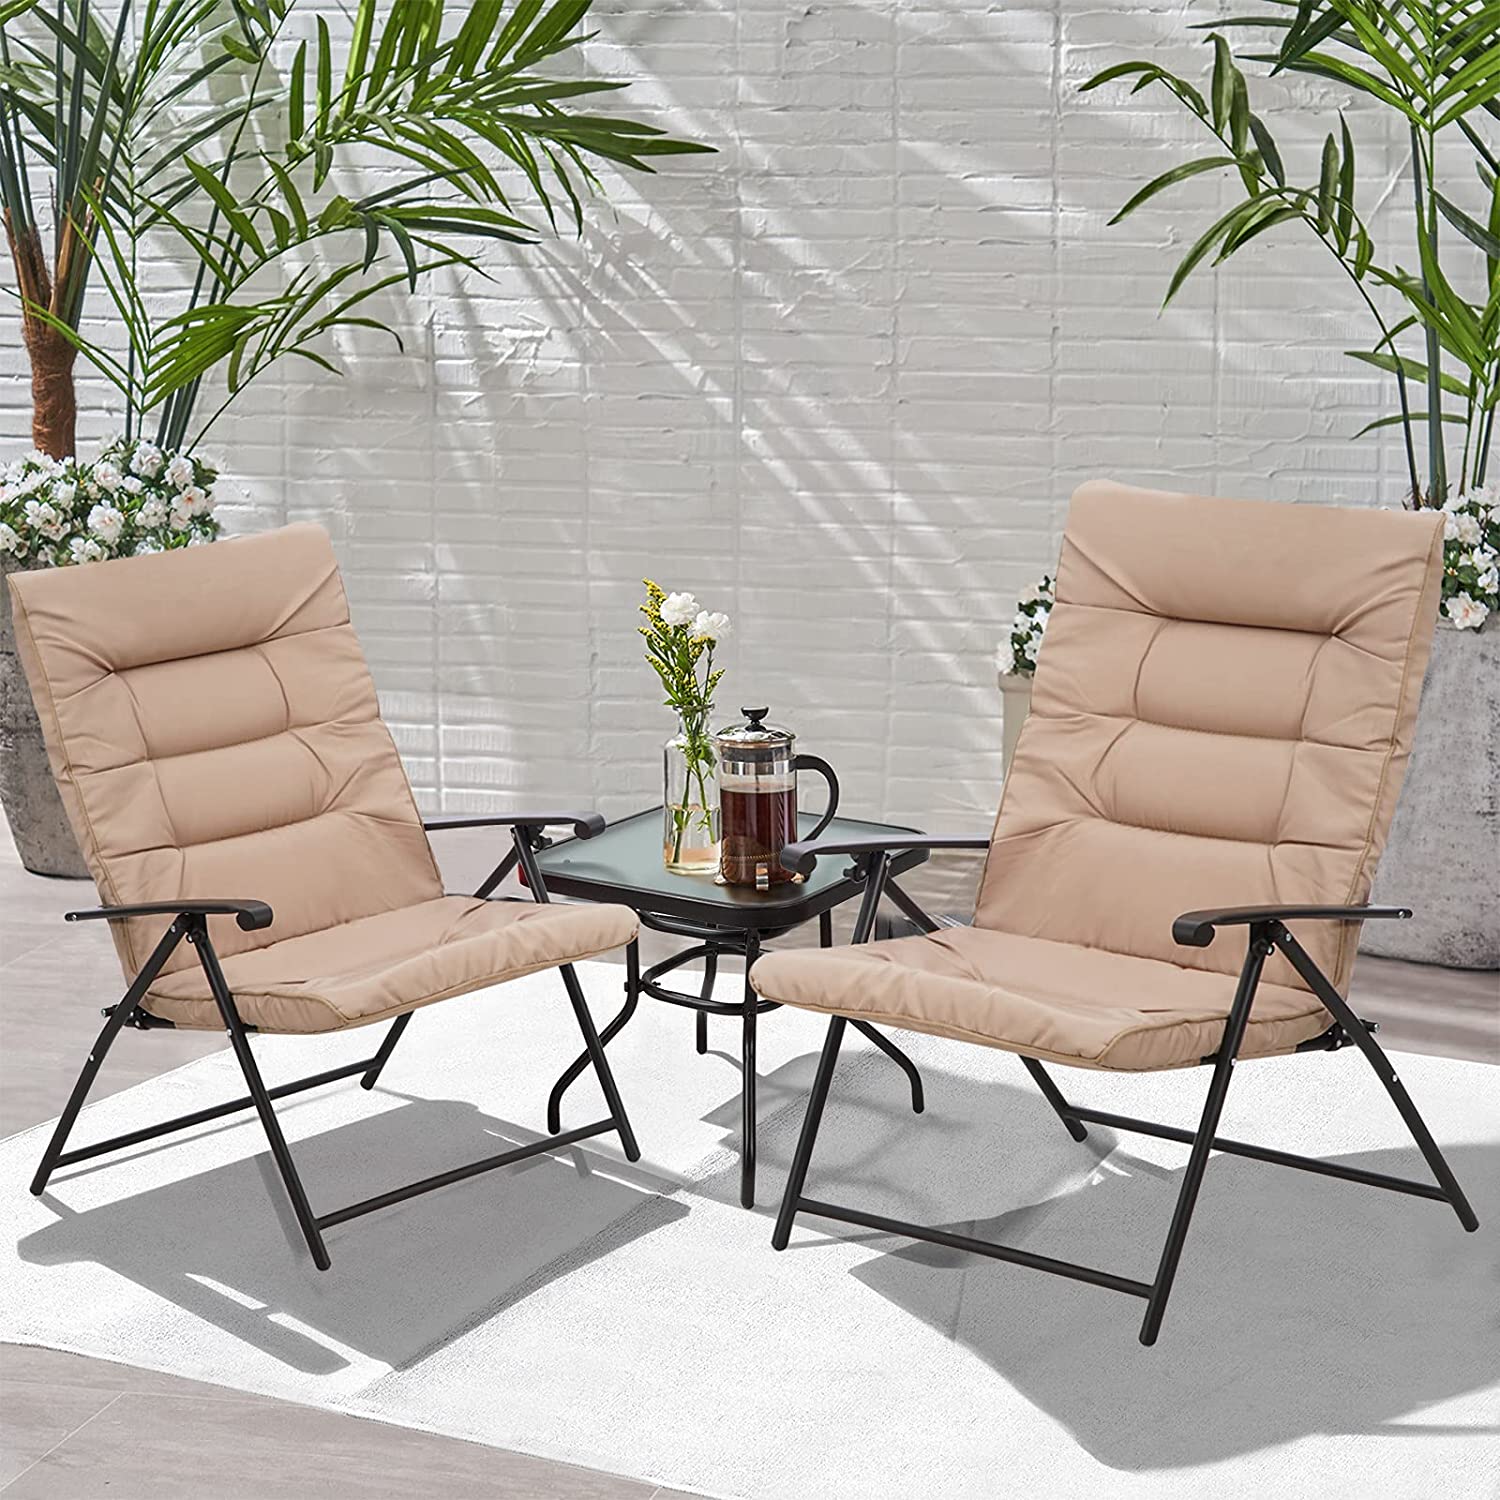 Suncrown Patio Padded Folding 3 Pieces Chair Set for 2 Adjustable Reclining Outdoor Furniture Metal Sling Chair with Coffee Table - image 1 of 6